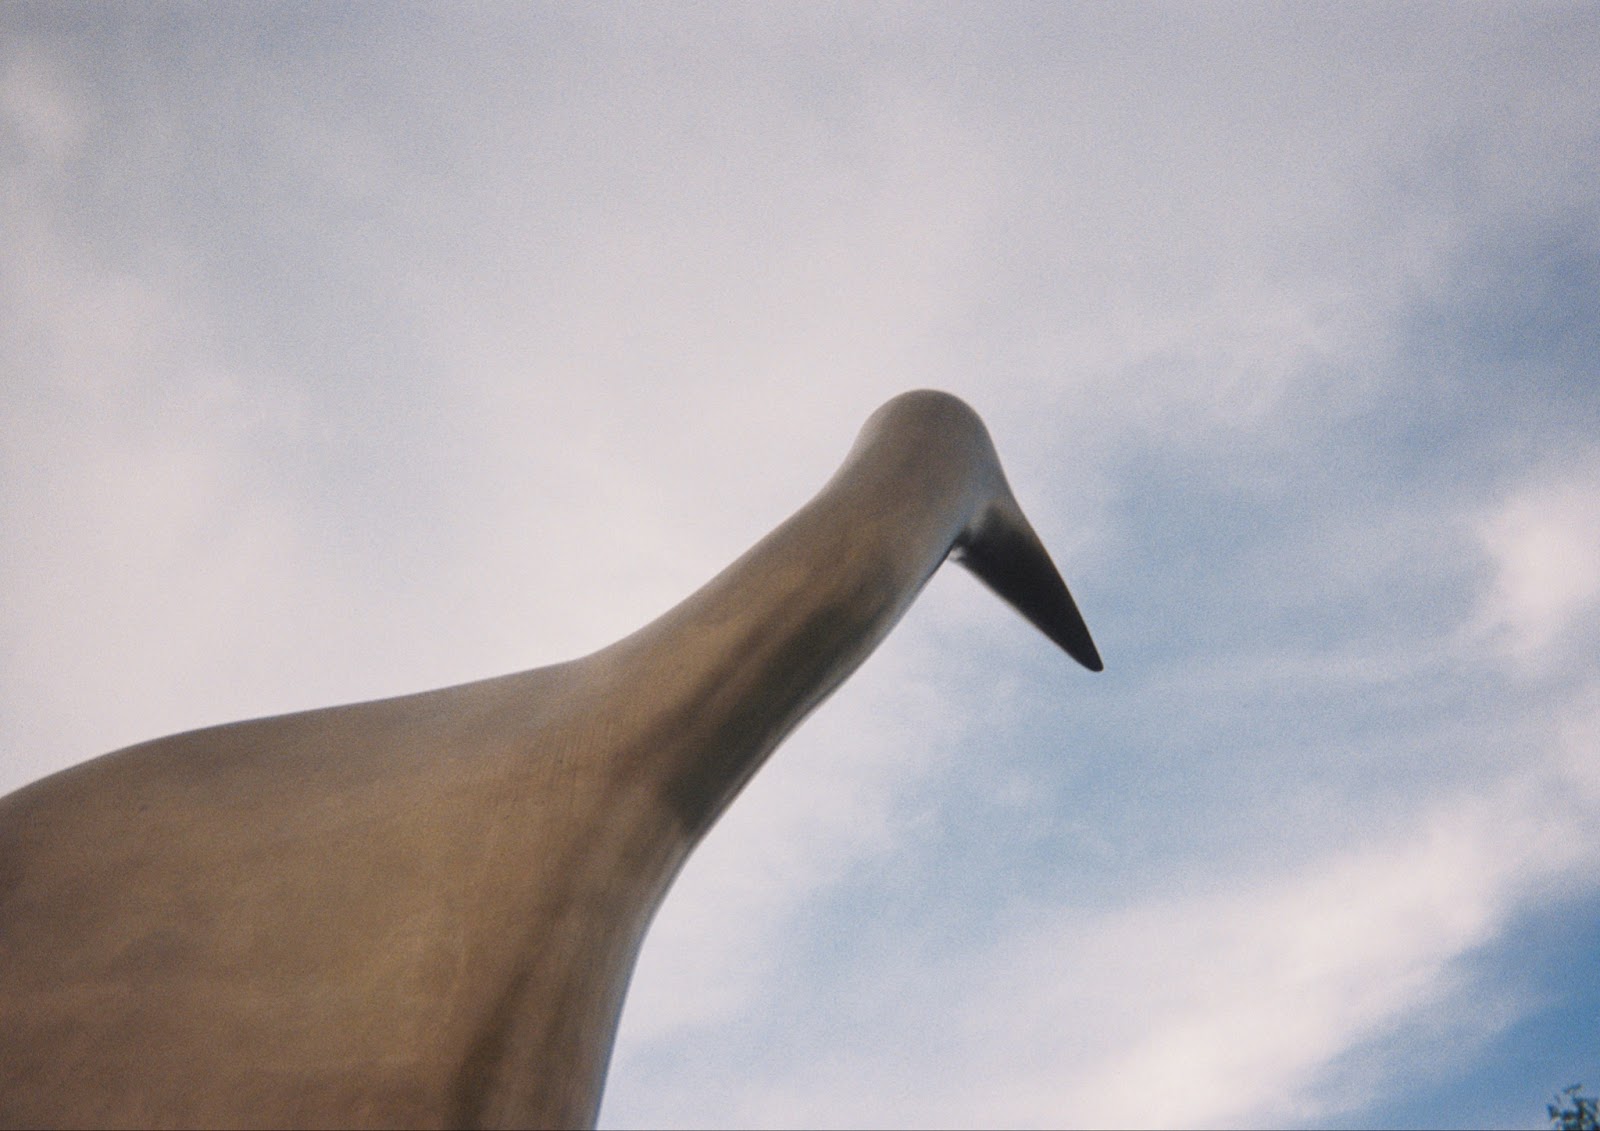 Image: Detail shot of Spirit of Survival, 1998. Metal egret's beak against the sky faced away from the camera. Courtesy of the author.